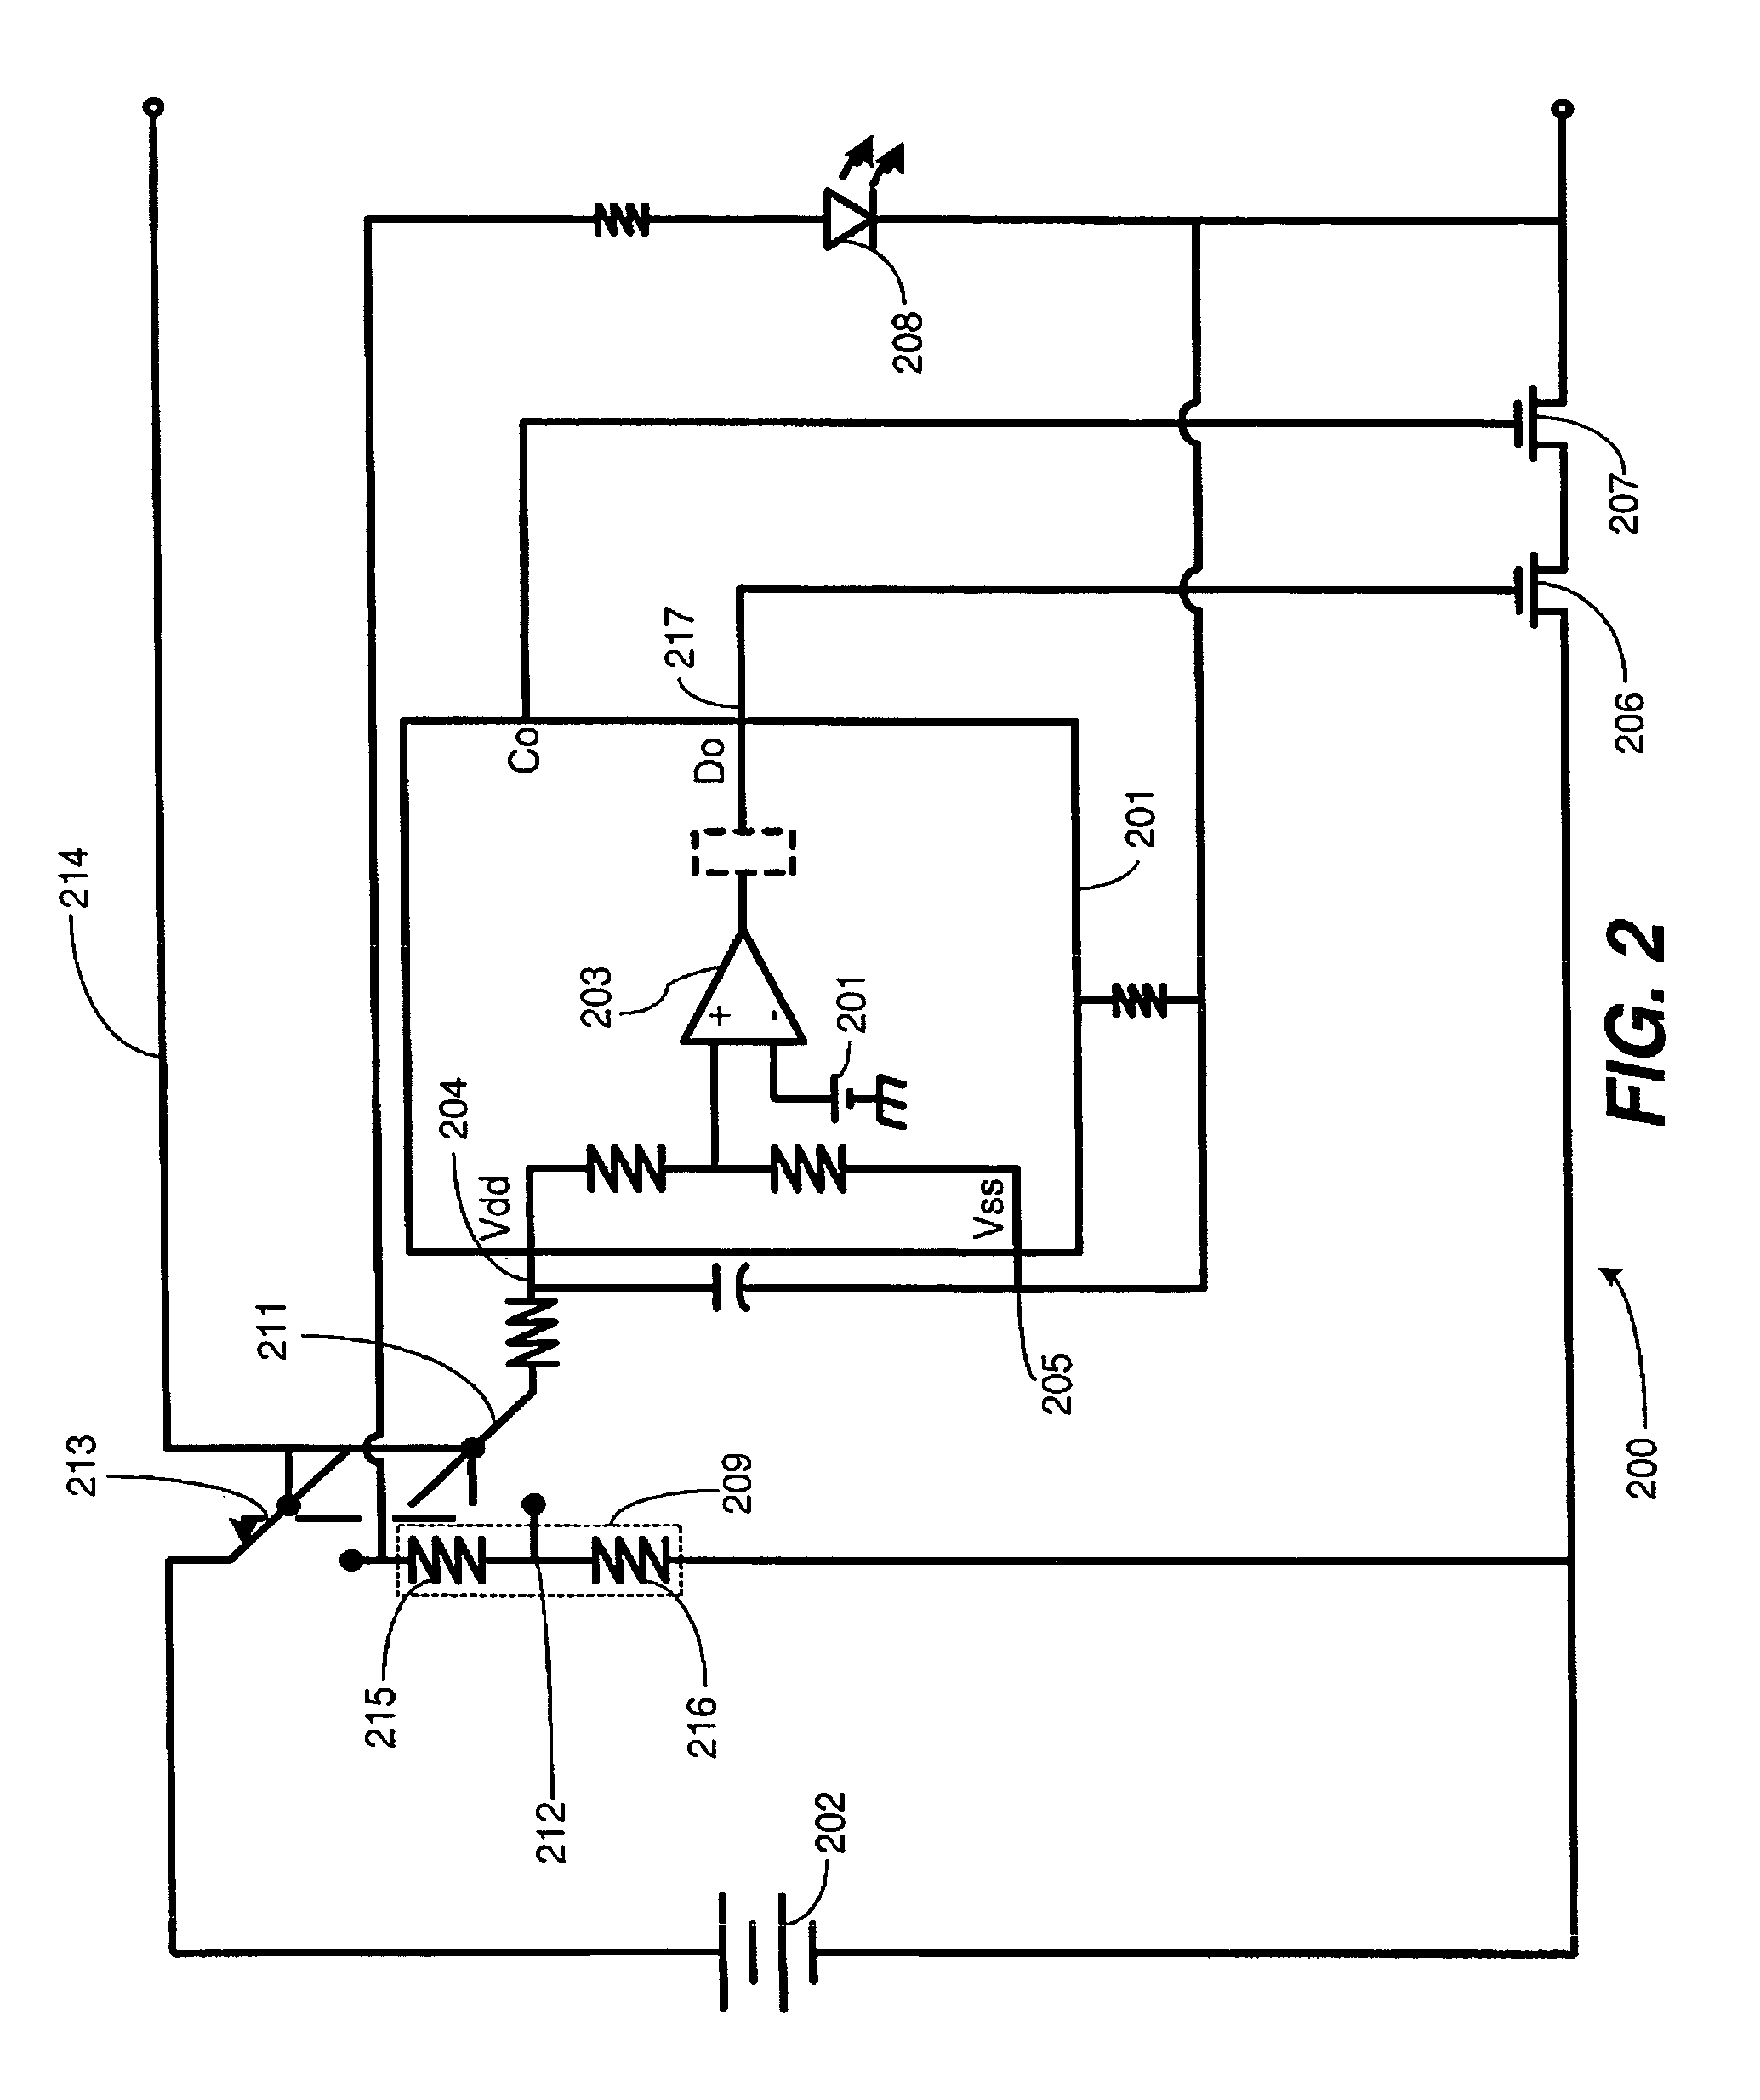 Battery fuel gauge using safety circuit